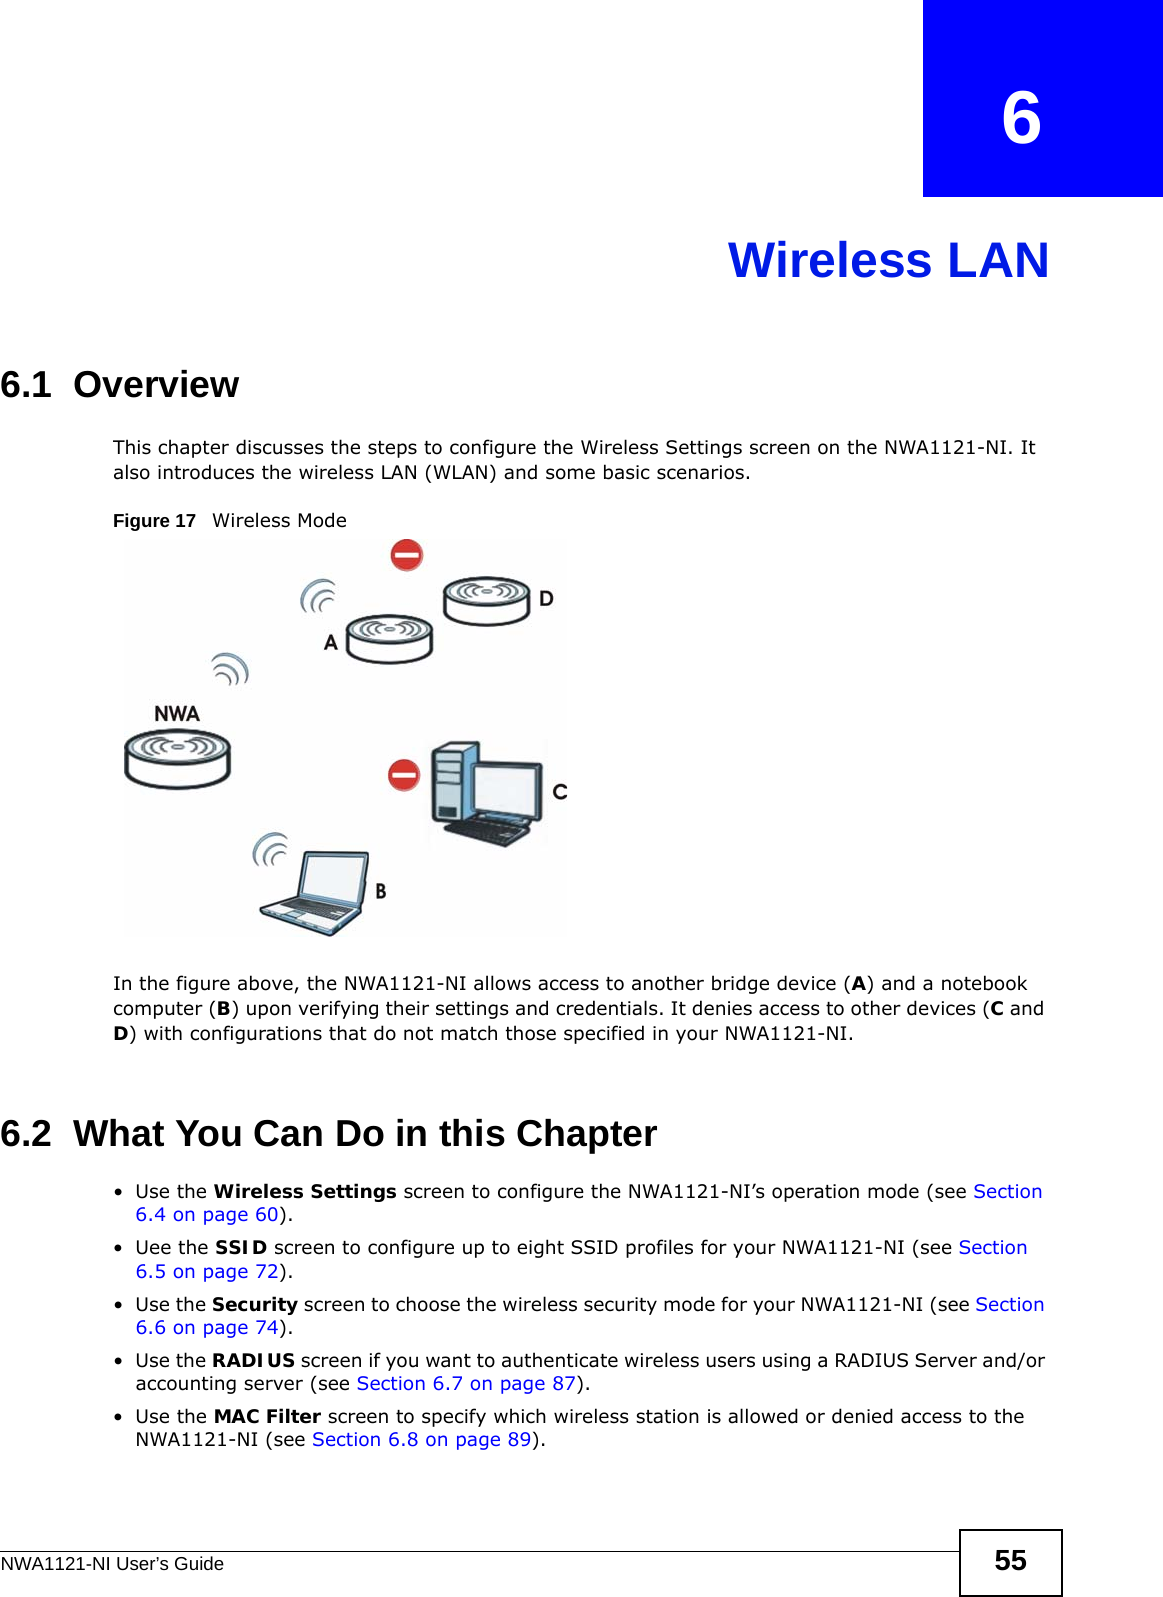 NWA1121-NI User’s Guide 55CHAPTER   6Wireless LAN6.1  OverviewThis chapter discusses the steps to configure the Wireless Settings screen on the NWA1121-NI. It also introduces the wireless LAN (WLAN) and some basic scenarios.Figure 17   Wireless ModeIn the figure above, the NWA1121-NI allows access to another bridge device (A) and a notebook computer (B) upon verifying their settings and credentials. It denies access to other devices (C and D) with configurations that do not match those specified in your NWA1121-NI.6.2  What You Can Do in this Chapter•Use the Wireless Settings screen to configure the NWA1121-NI’s operation mode (see Section 6.4 on page 60).•Uee the SSID screen to configure up to eight SSID profiles for your NWA1121-NI (see Section 6.5 on page 72).•Use the Security screen to choose the wireless security mode for your NWA1121-NI (see Section 6.6 on page 74).•Use the RADIUS screen if you want to authenticate wireless users using a RADIUS Server and/or accounting server (see Section 6.7 on page 87).•Use the MAC Filter screen to specify which wireless station is allowed or denied access to the NWA1121-NI (see Section 6.8 on page 89).